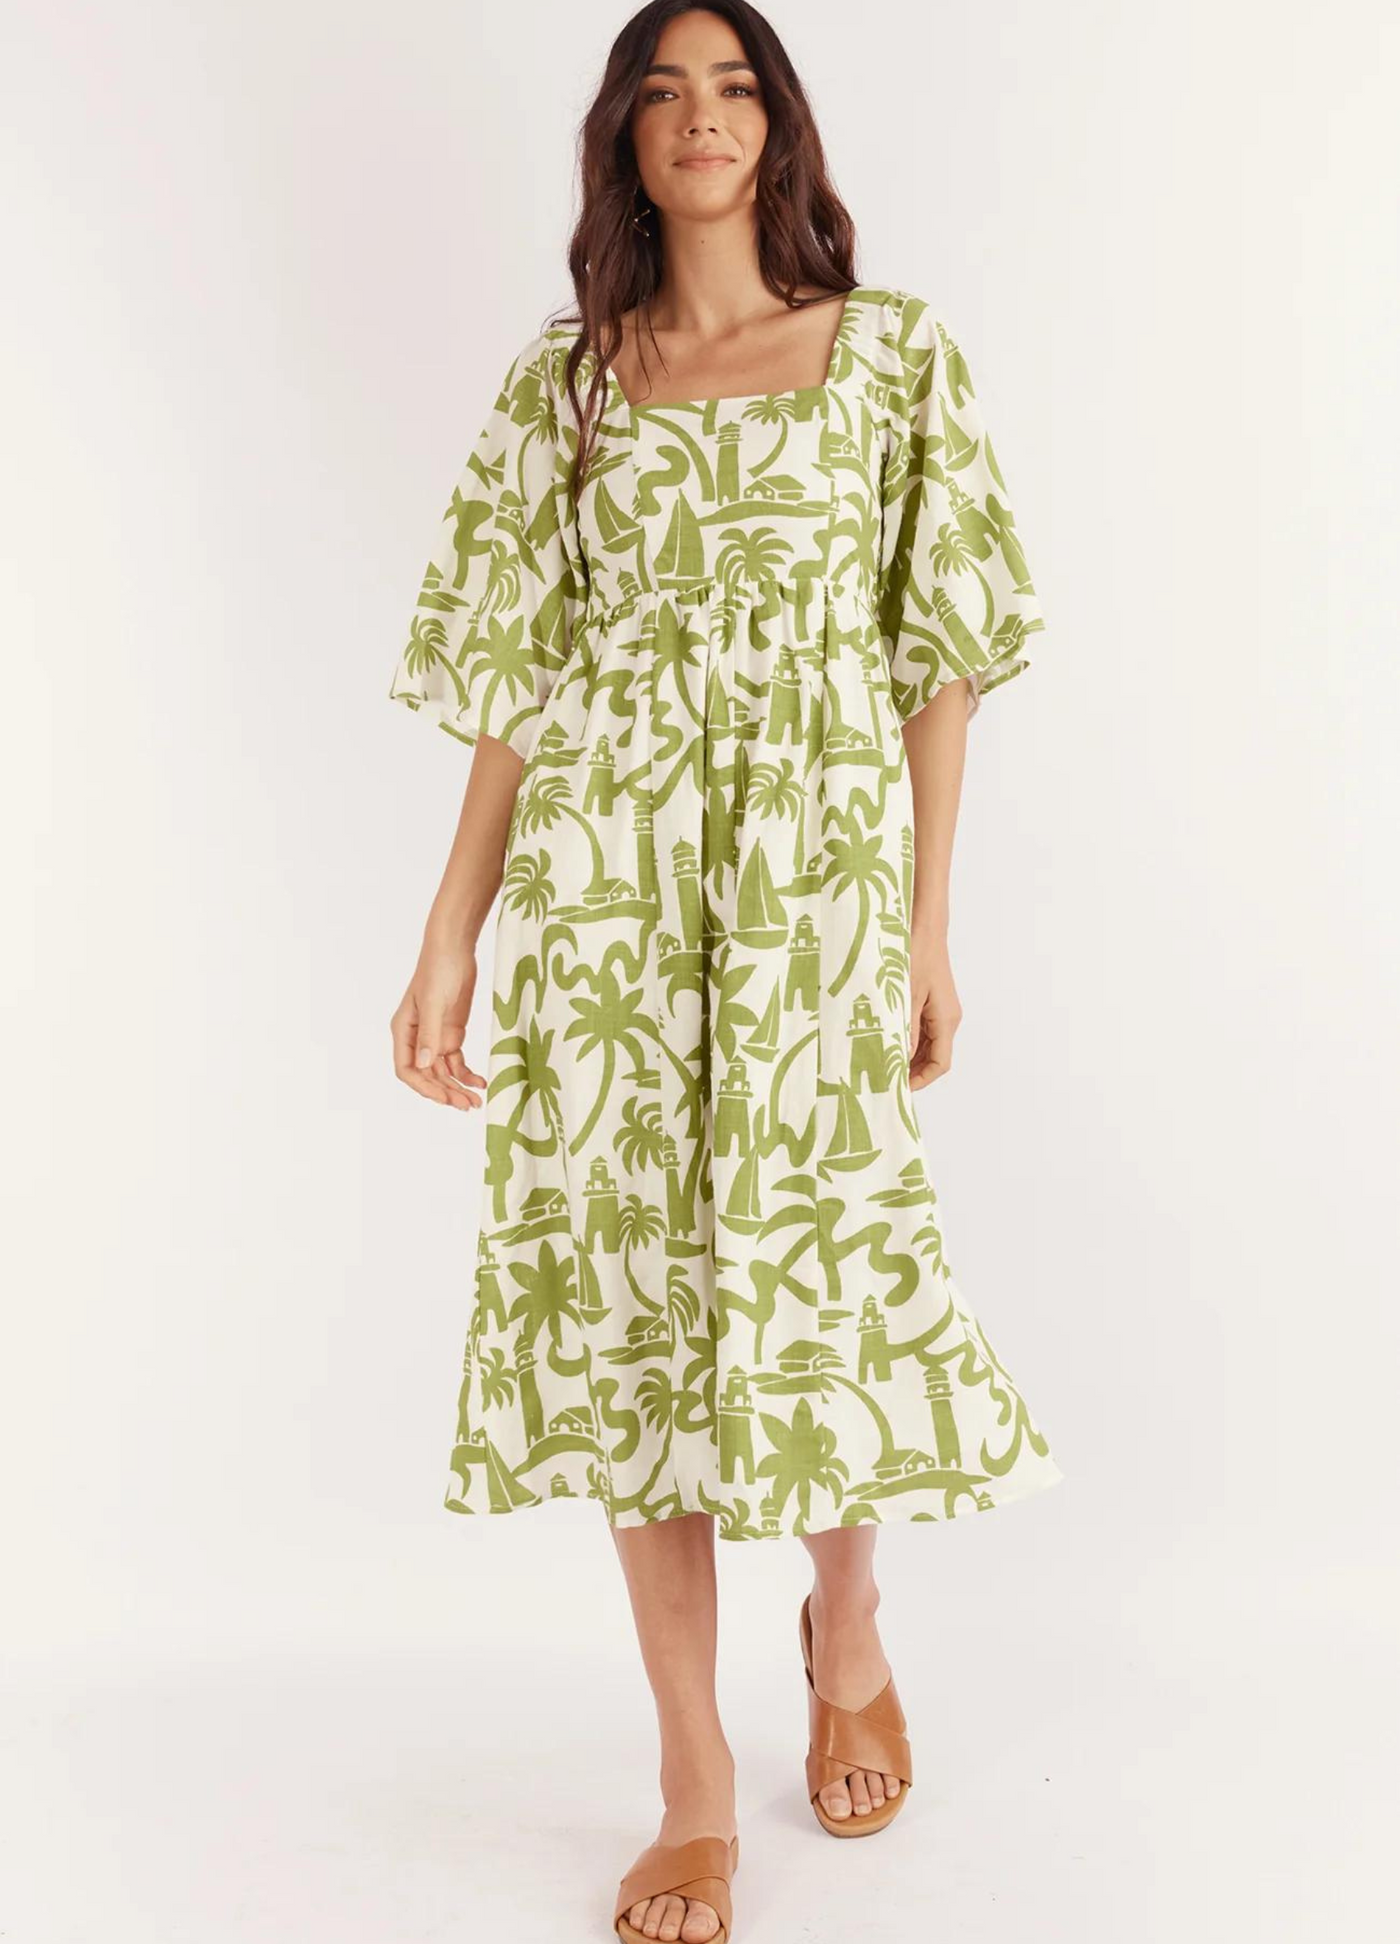 Model wearing the Dulce Midi Dress from Australian Brand Girl in the Sun in green and white lighthouse print